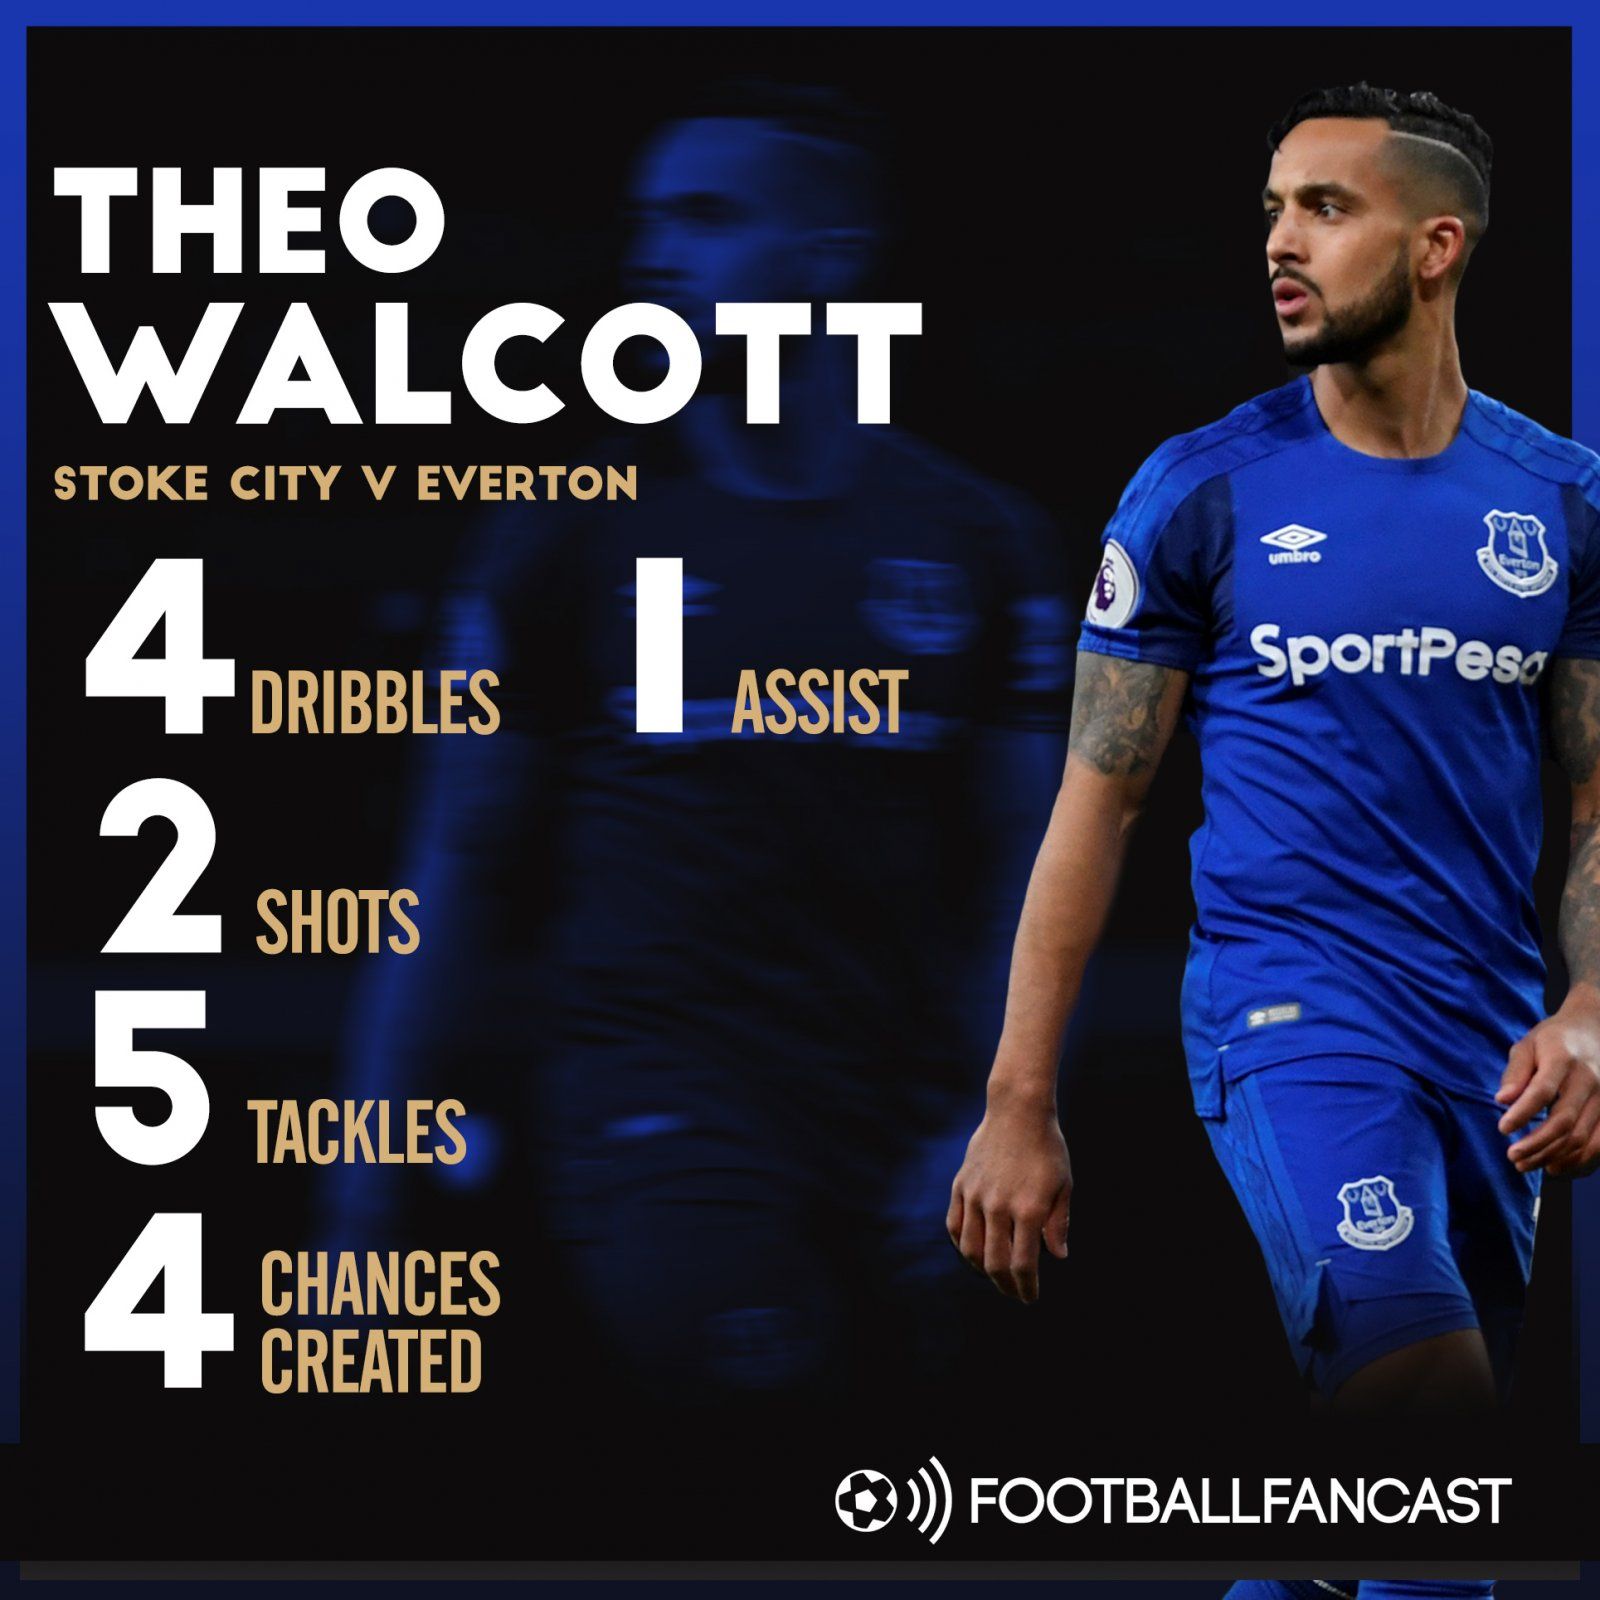 Theo Walcott's stats from 2-1 win over Stoke City